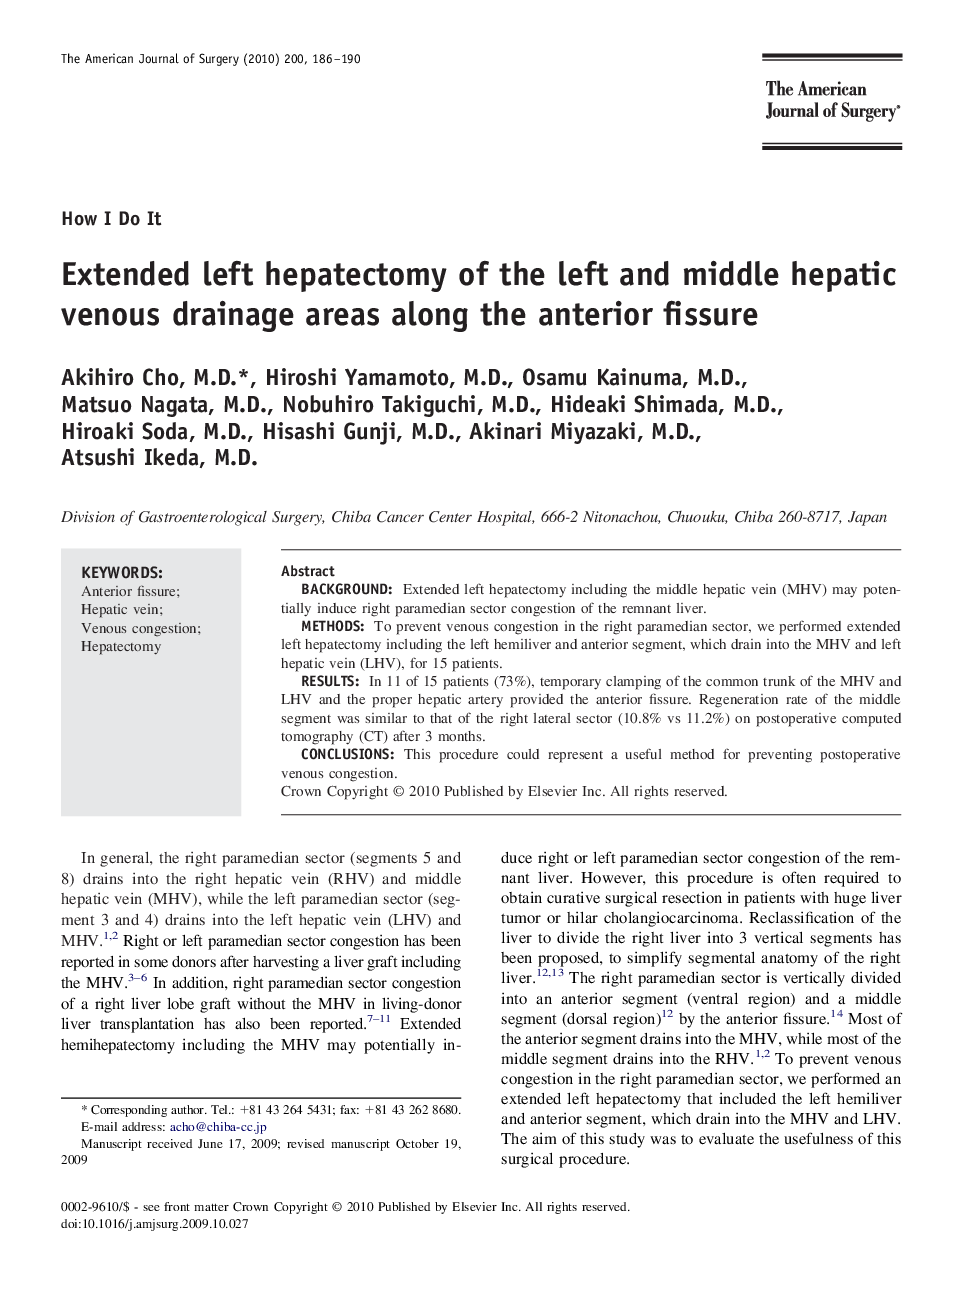 Extended left hepatectomy of the left and middle hepatic venous drainage areas along the anterior fissure